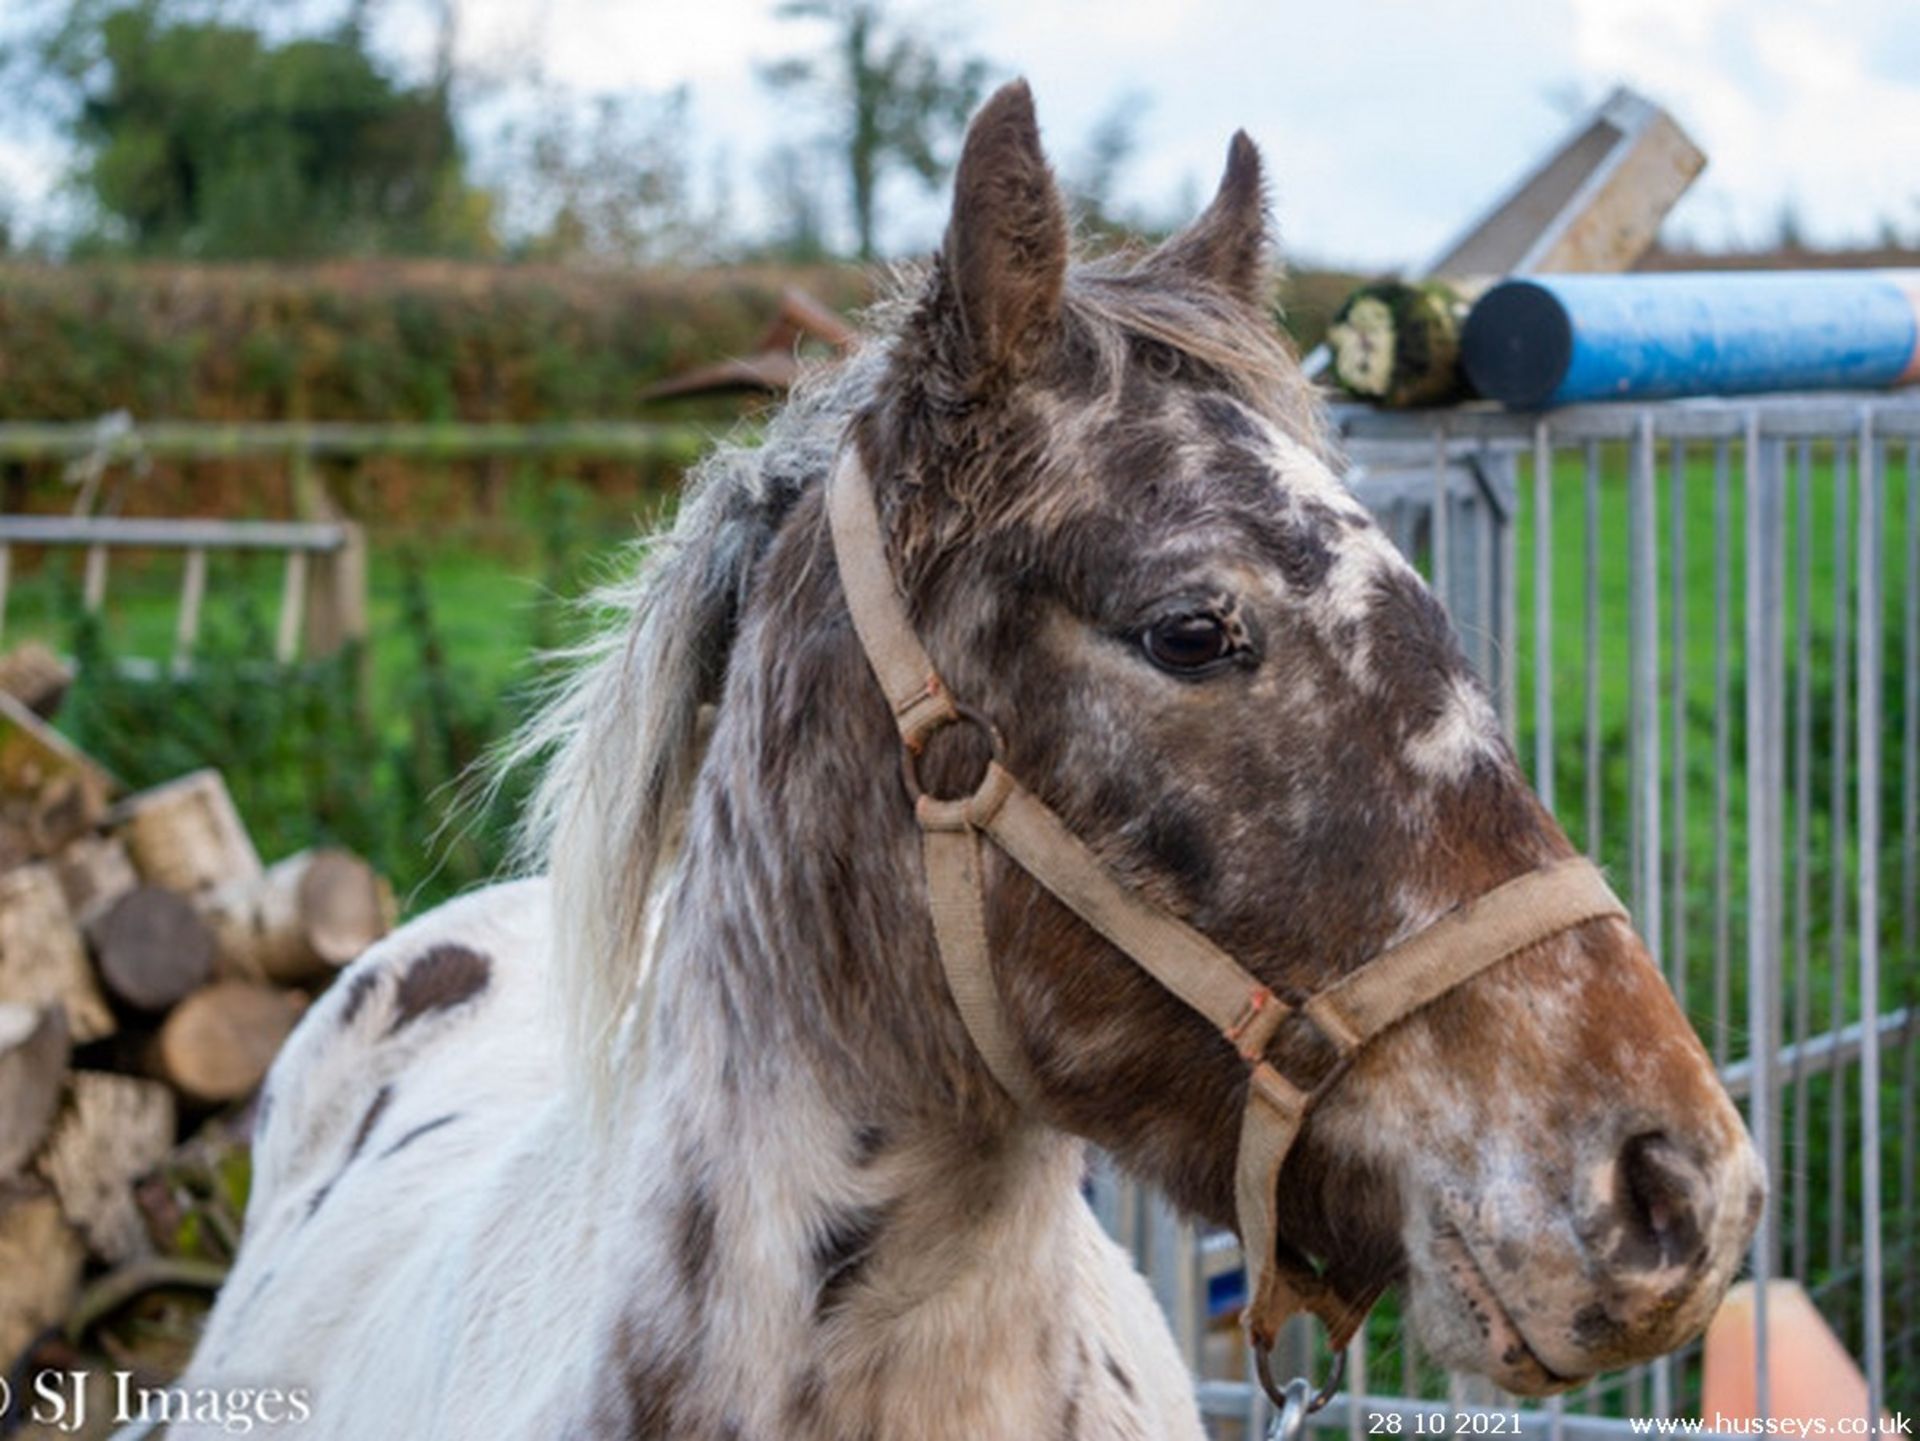 'BATWORTHY VICEROY' 4 YEARS OLD SPOTTED DARTMOOR HILL PONY GELDING